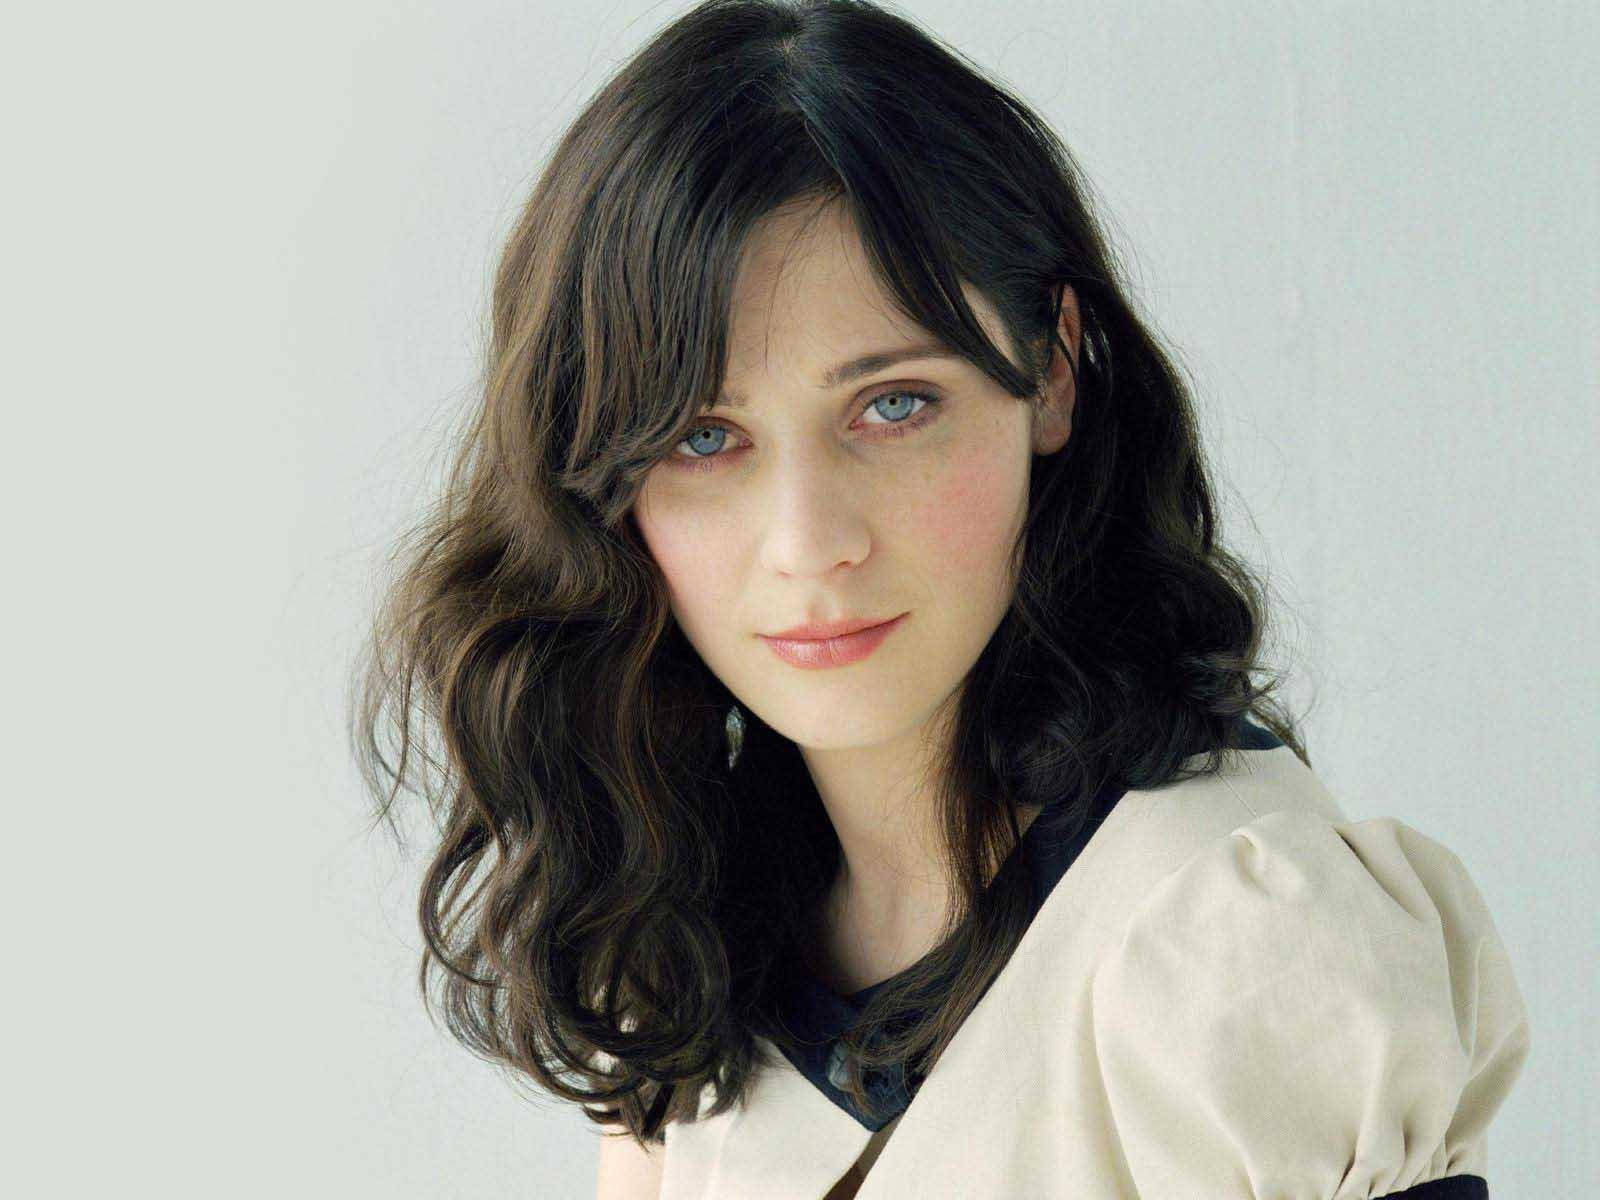 https://wallpapers.com/images/hd/zooey-deschanel-white-aesthetic-photo-pzhyj6e5gcqv6aq2.jpg